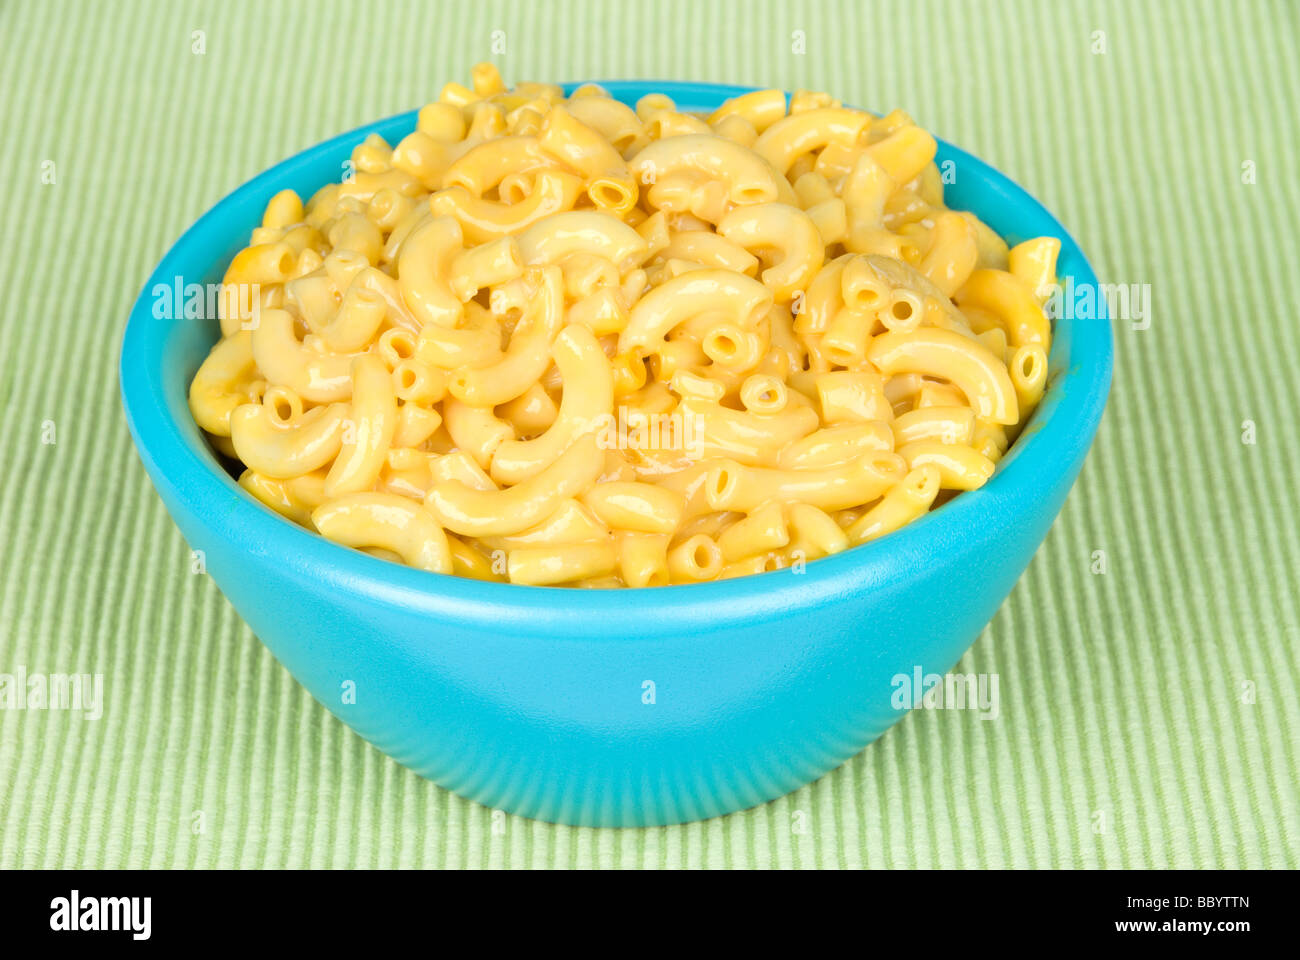 A bowl of macaroni and cheese on a green placemat Stock Photo